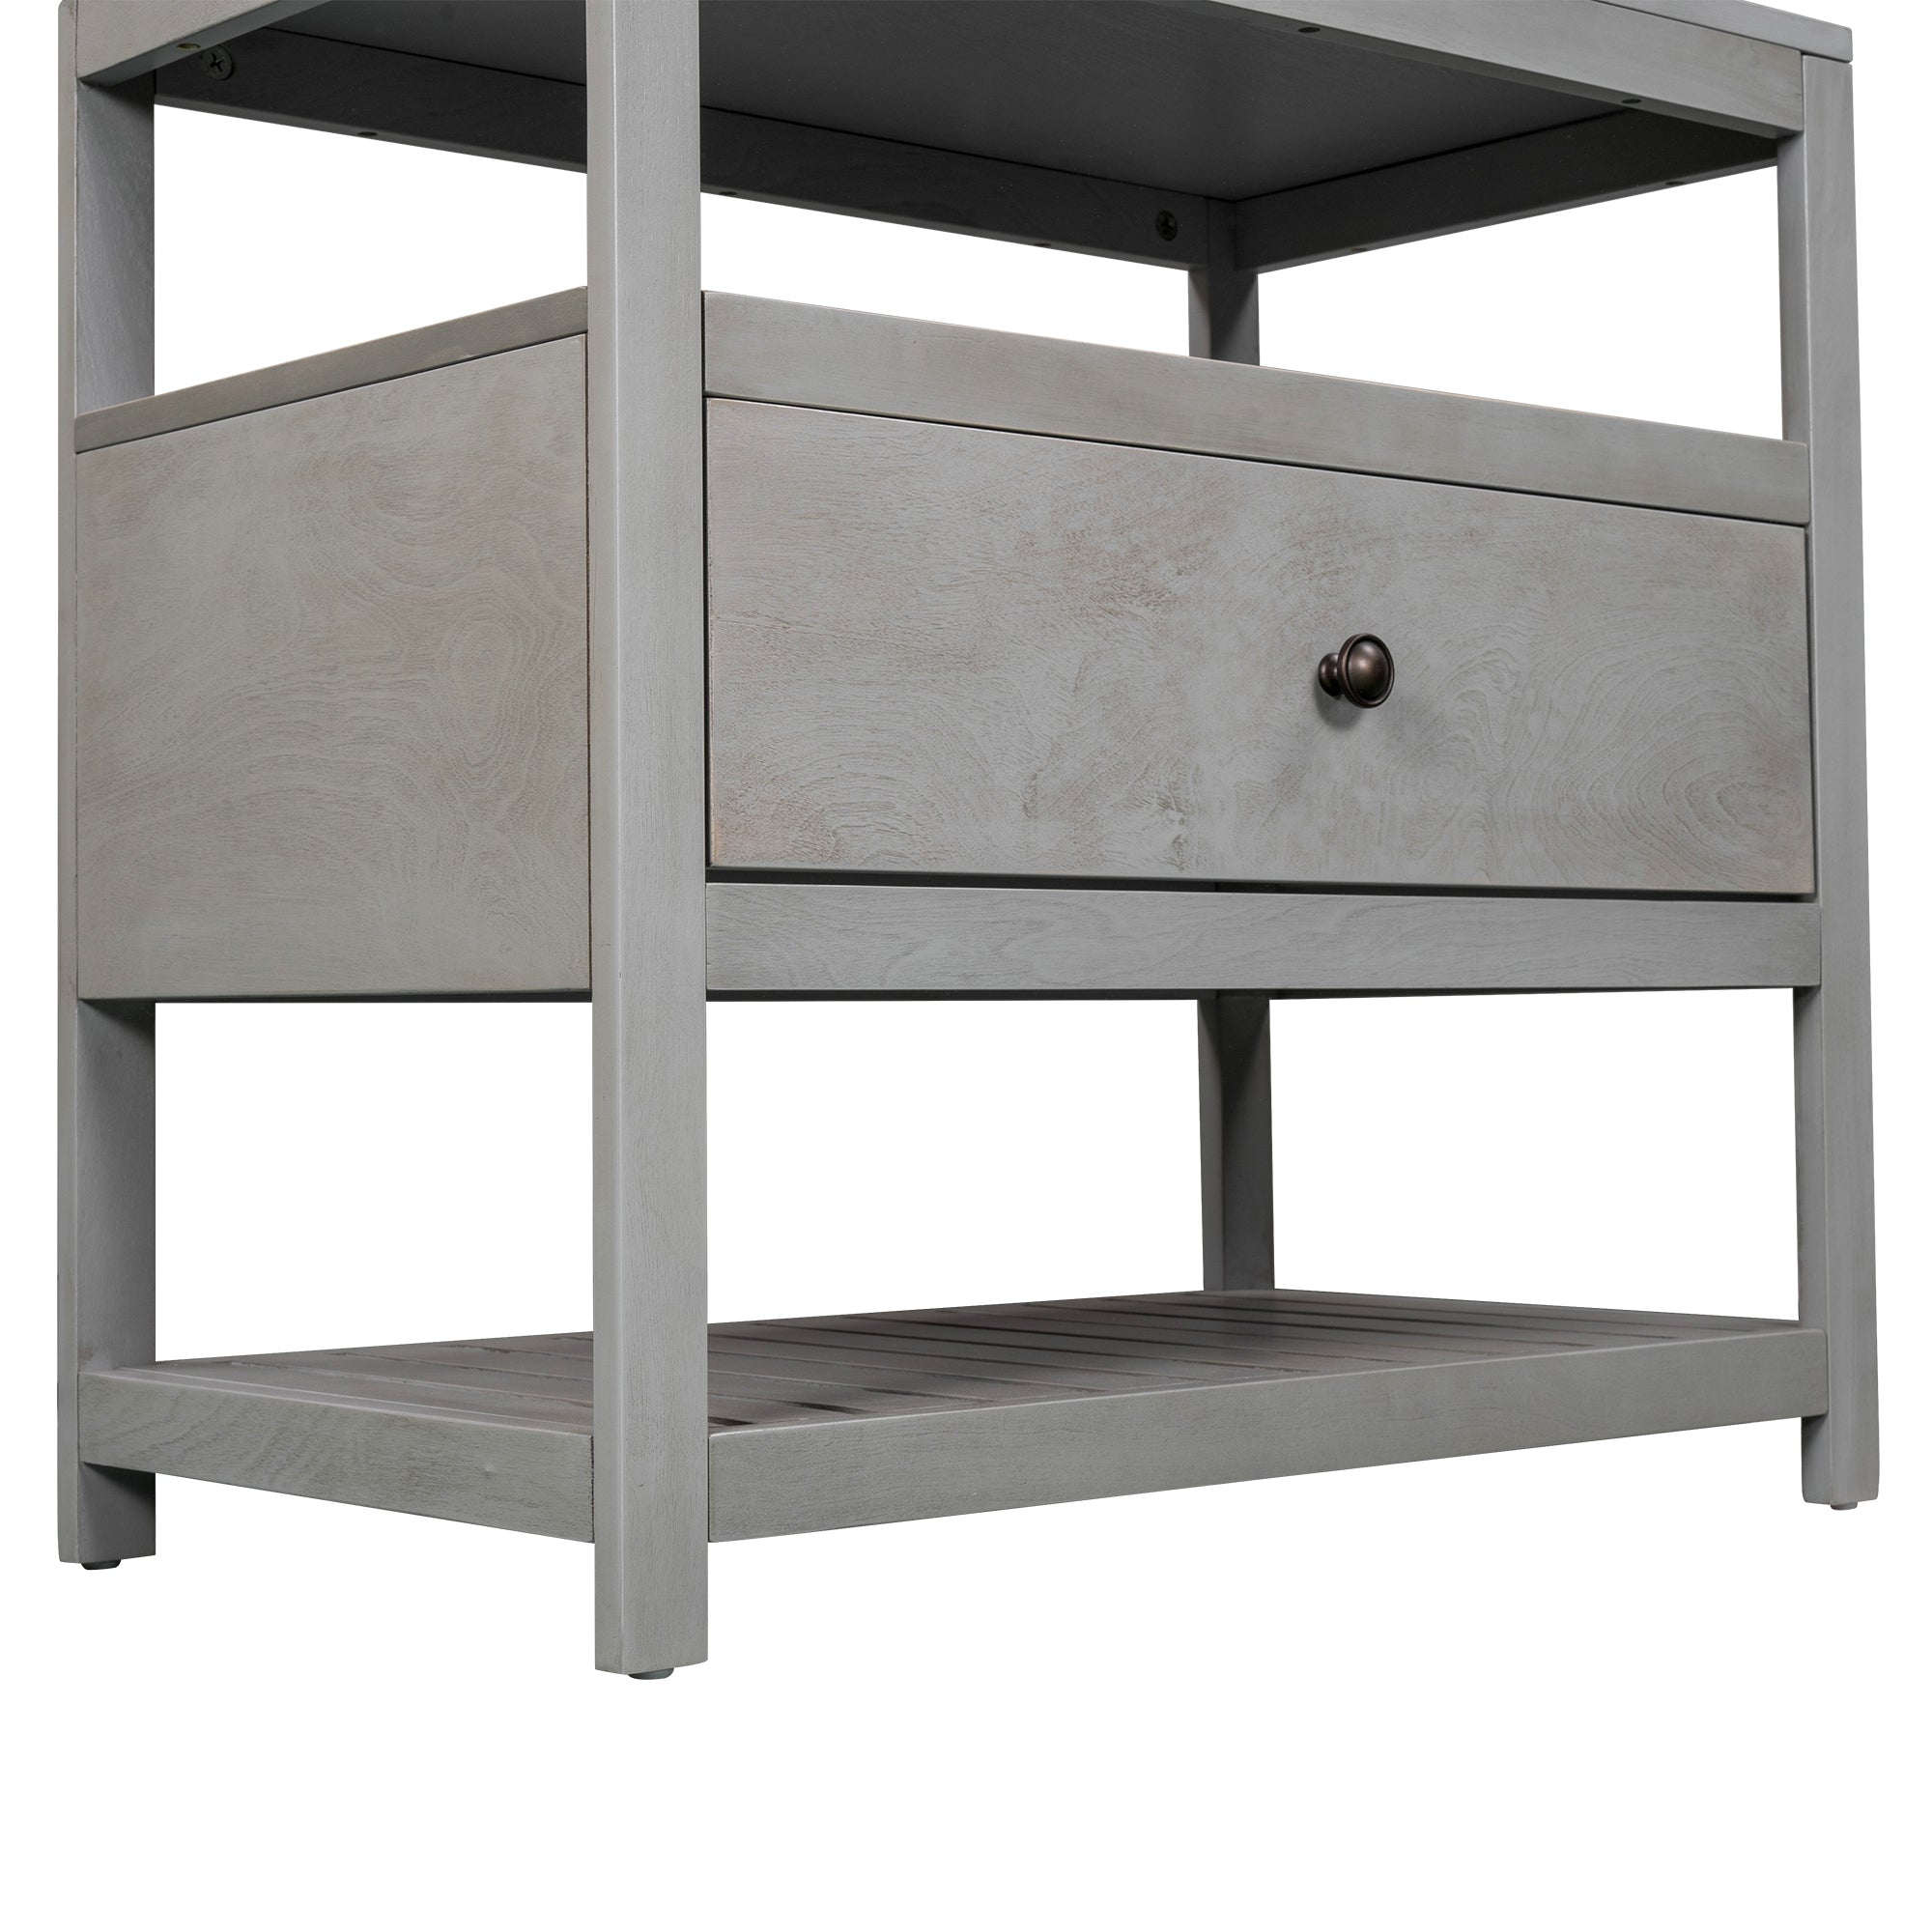 Modern Wooden Nightstand with Drawers Storage (Gray)